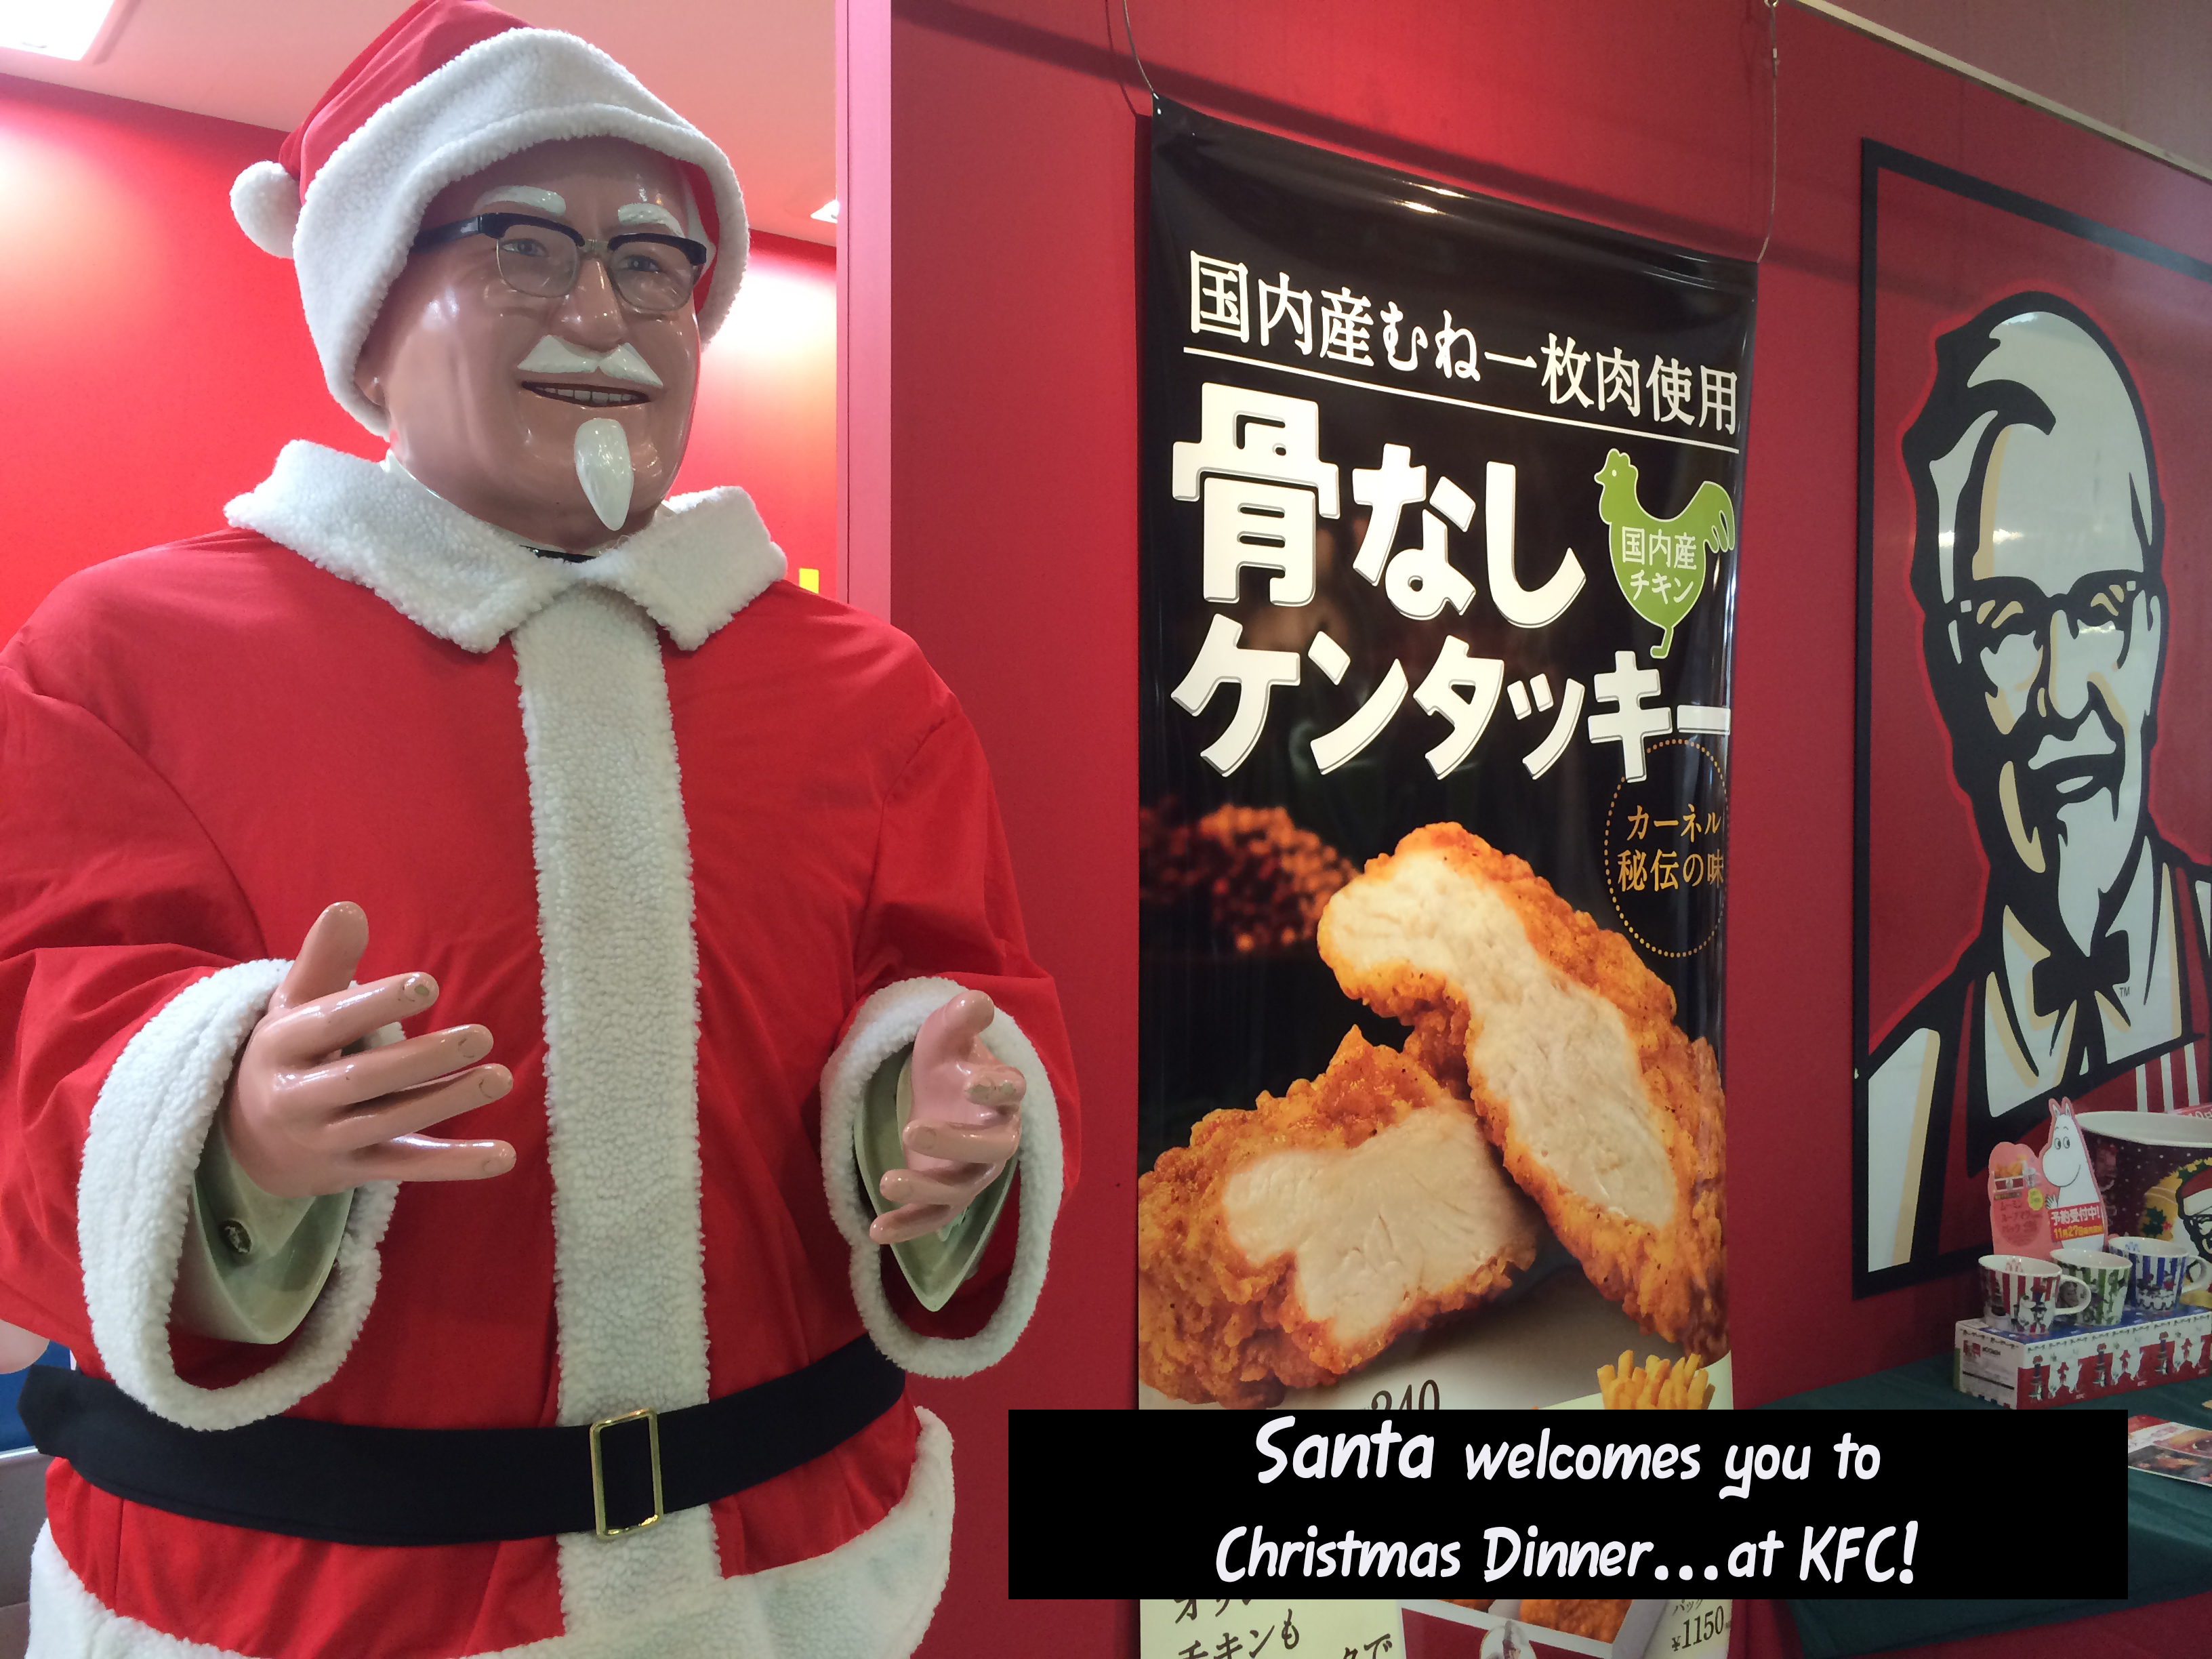 If you find this weird you will be shocked to know almost everyone in Japan goes to KFC for Christmas and it's a tradition there; So a golden tree worth almost 2 million dollars doesn't seem that crazy in comparison.